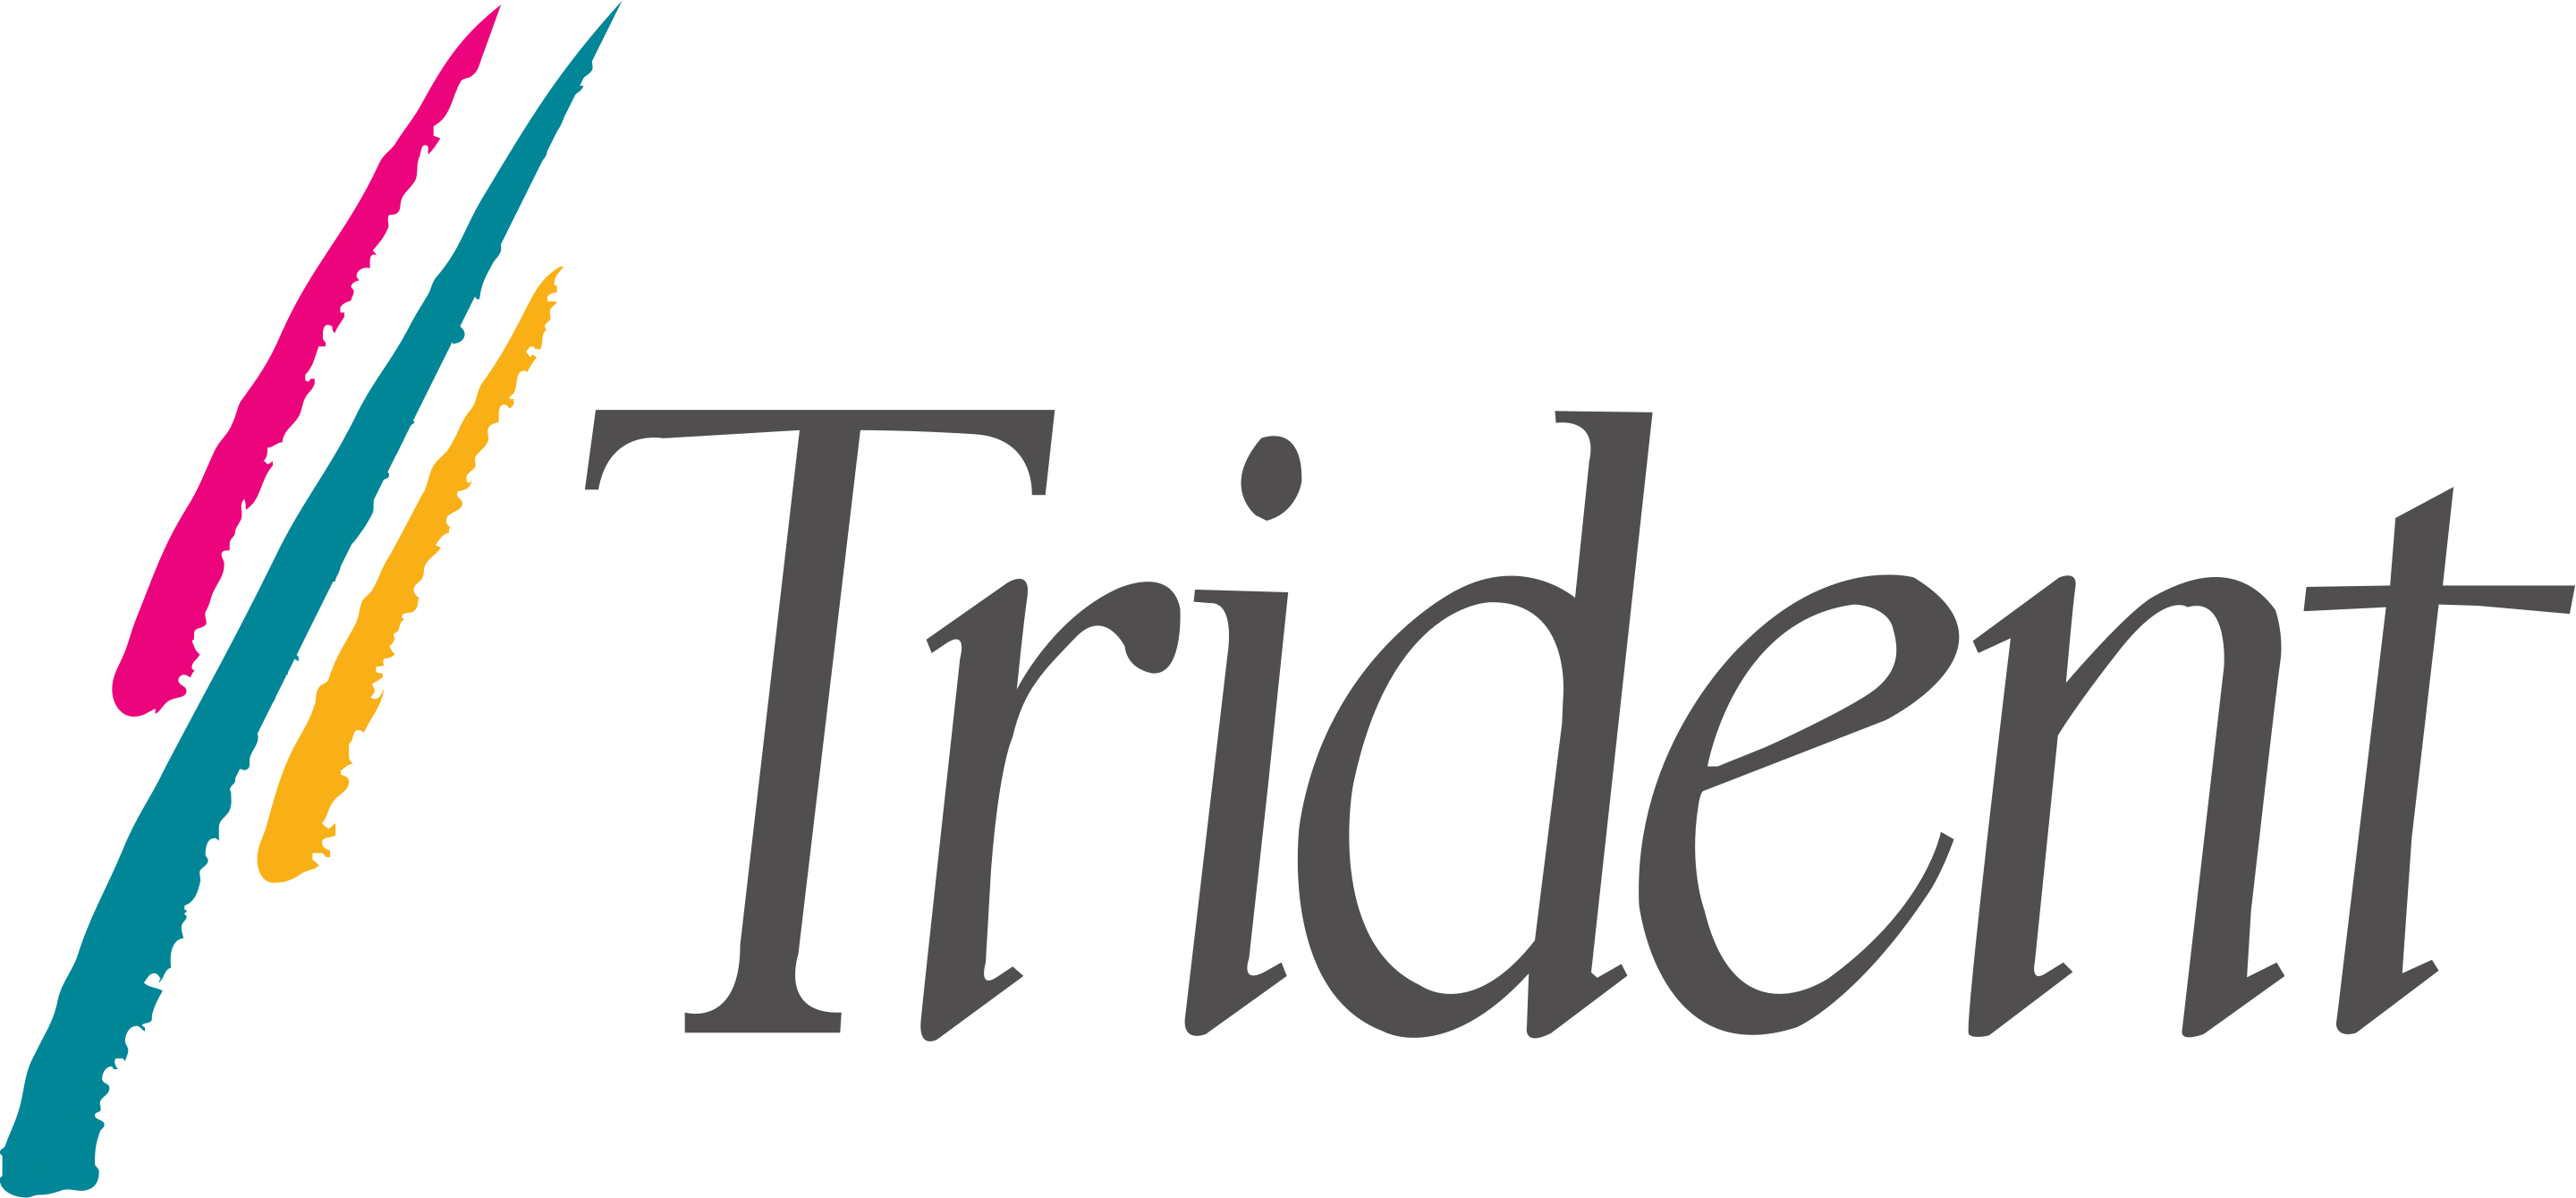 Trident Microsystems